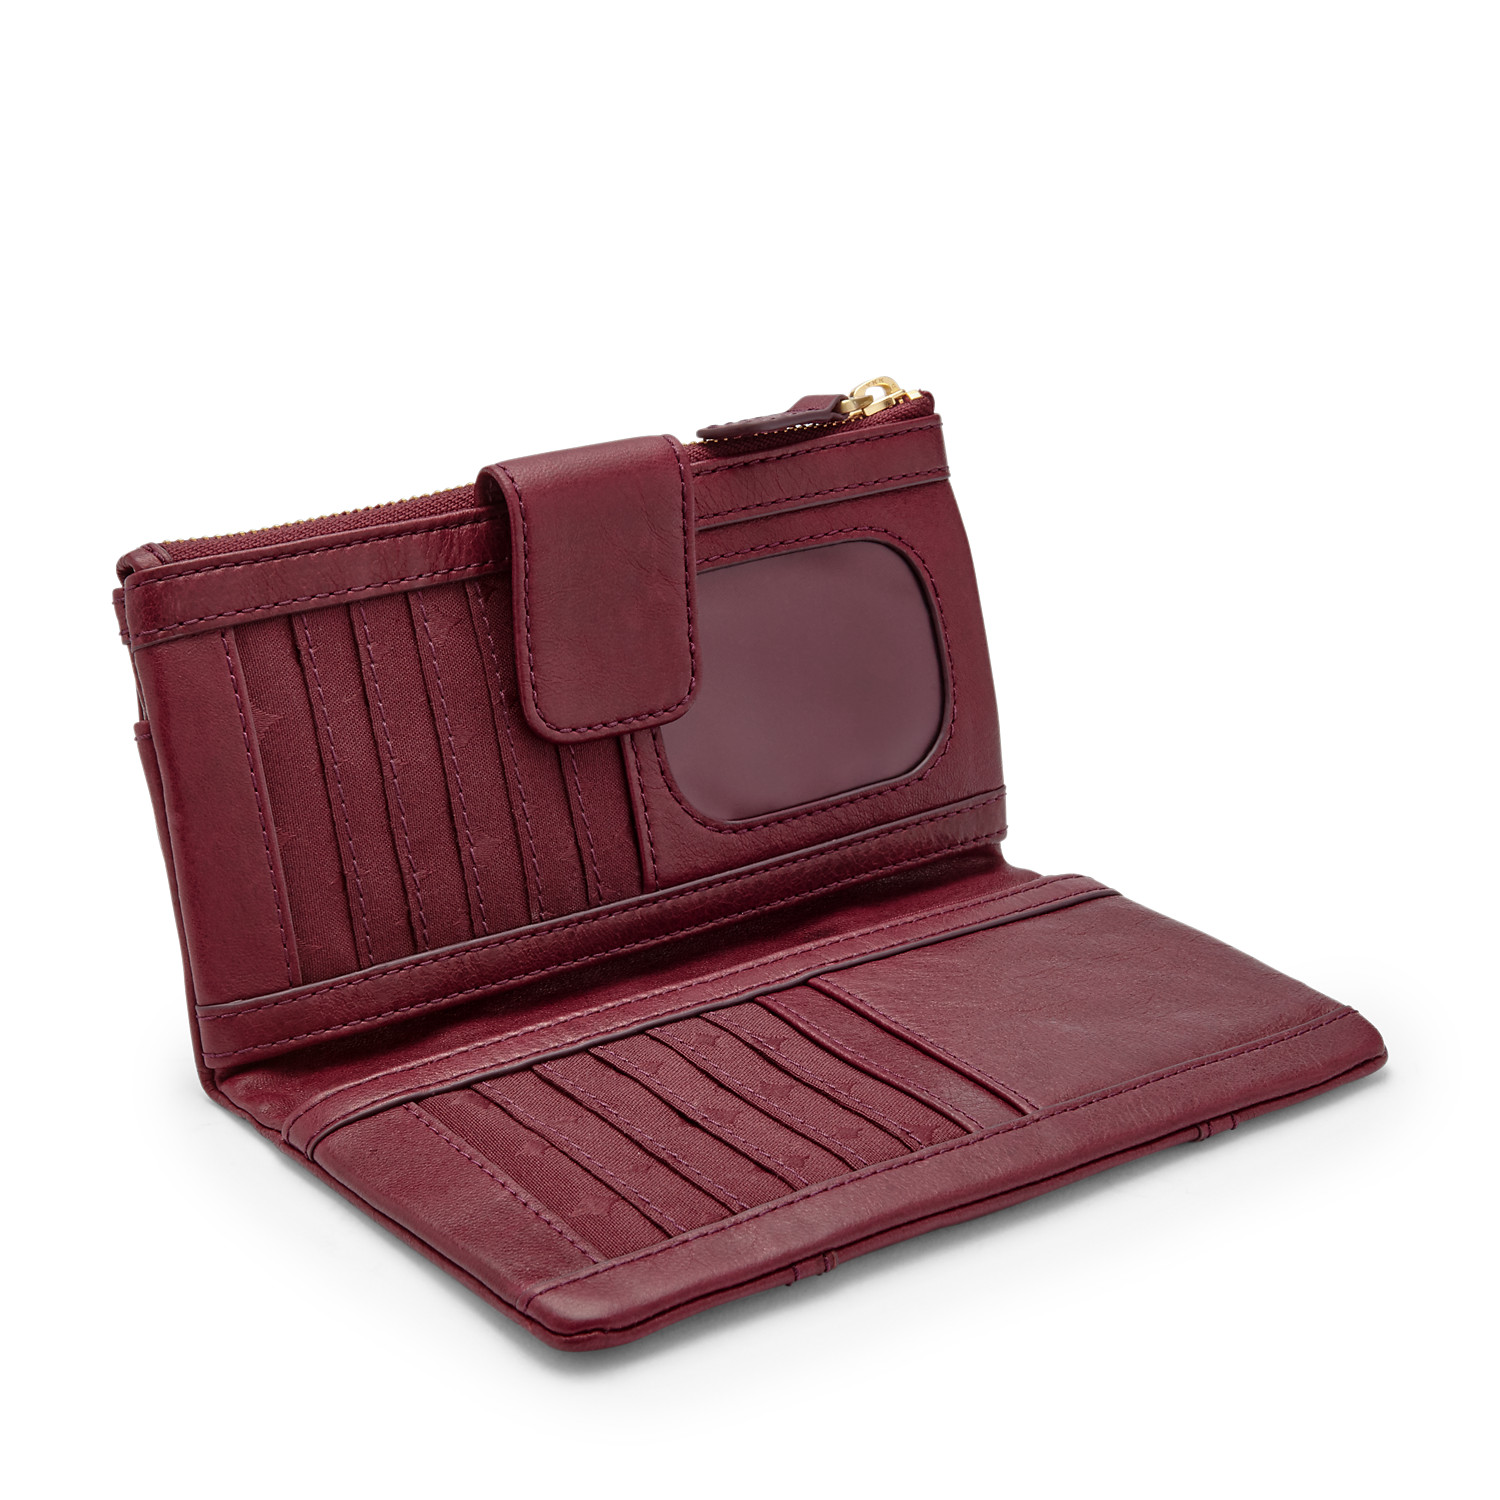 USA Boutique: Fossil Emory Leather Clutch Wallet - Maroon